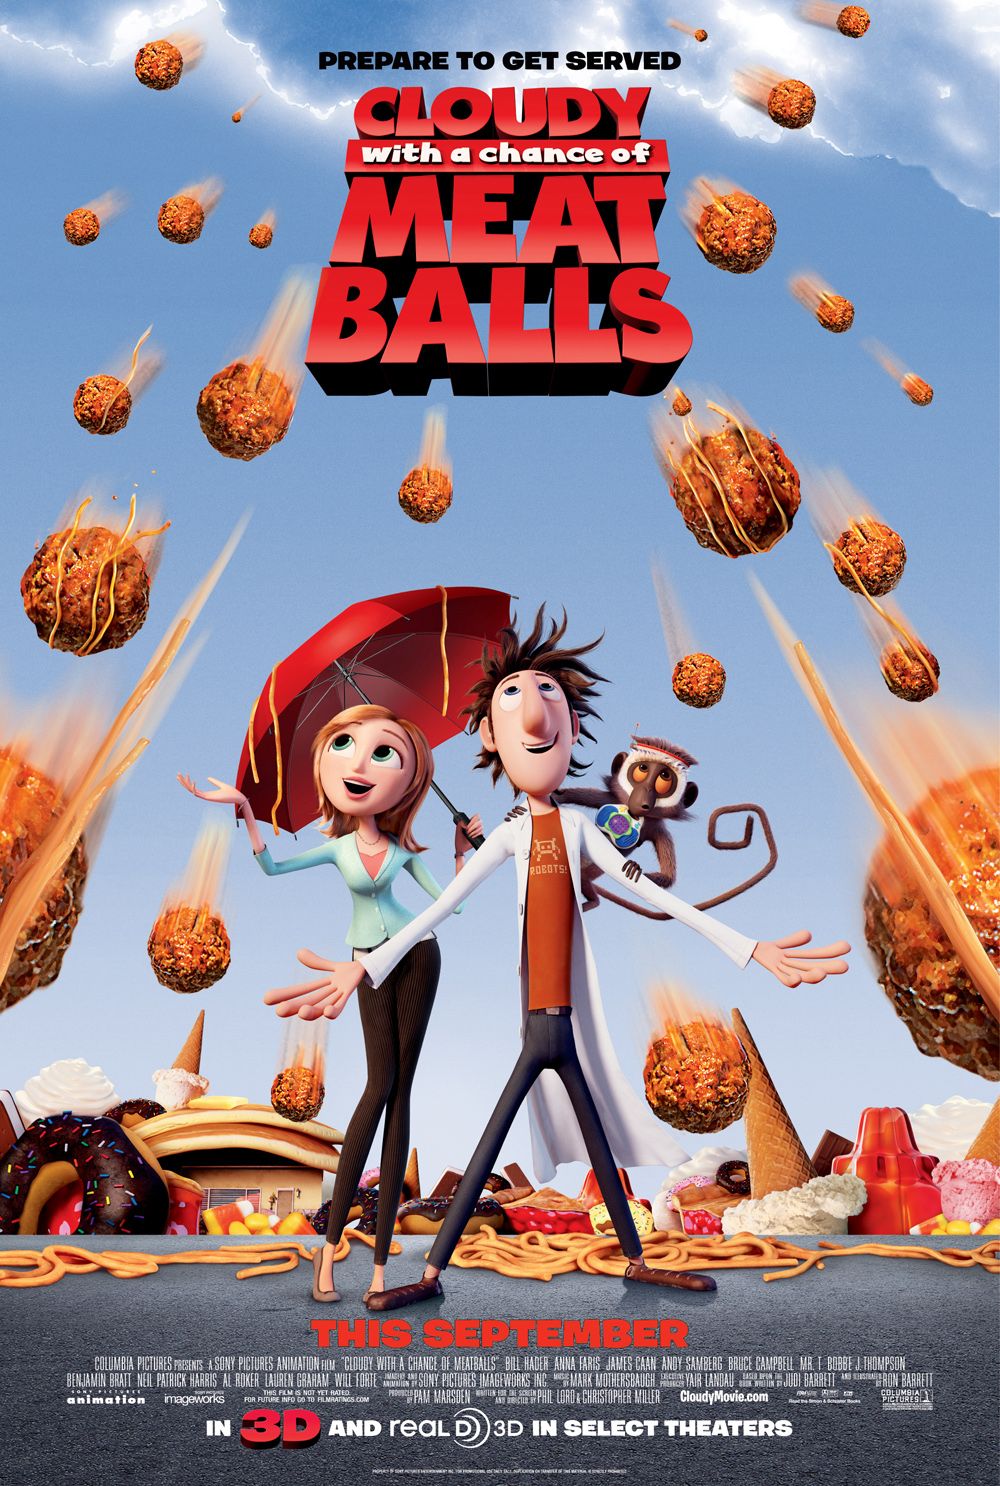 [cloudy-with-a-chance-of-meatballs-movie-poster1.jpg]